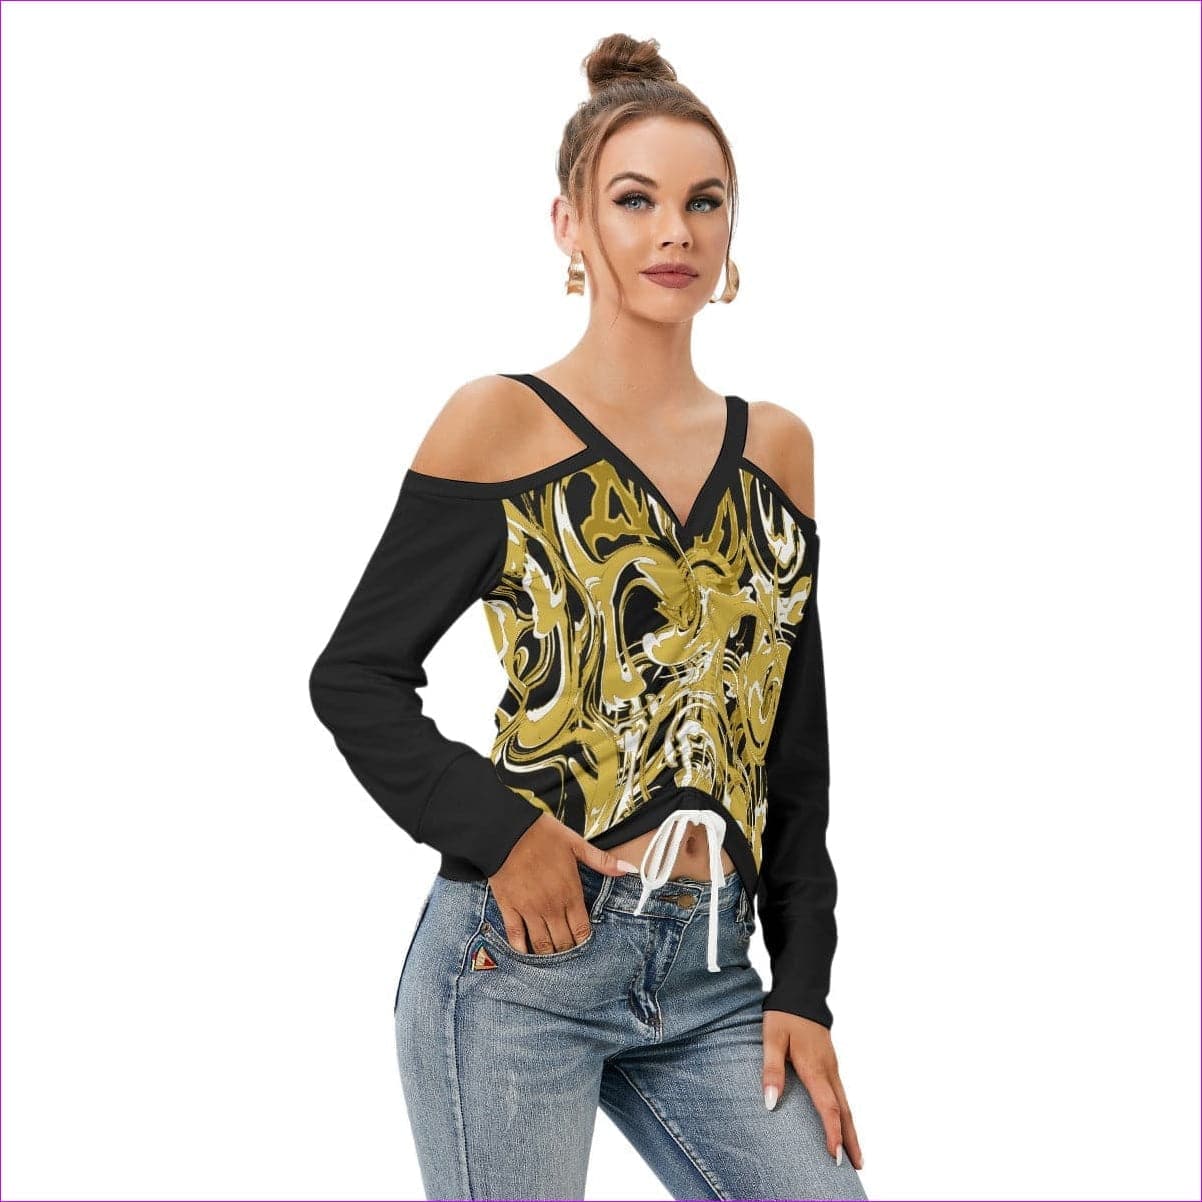 Black Ivy Distressed Women’s Black V-neck Cold Shoulder Blouse With Long Sleeve - women's top at TFC&H Co.